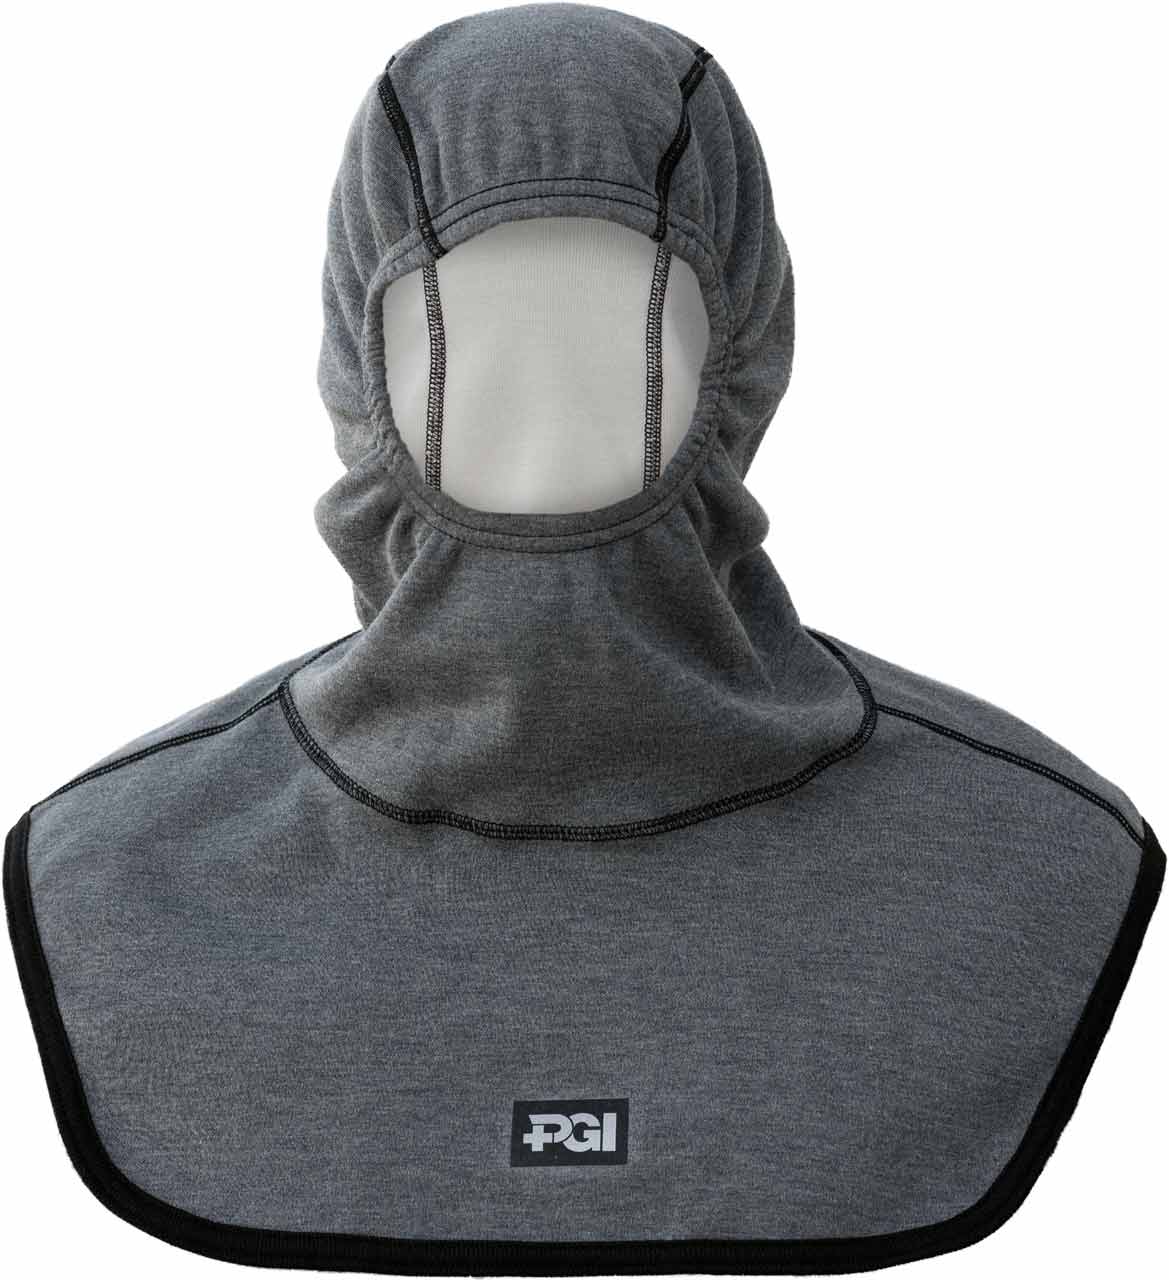 PGI BarriAire Silver Particulate Hood - Comprehensive Coverage with Extended Bib and Nomex<sup>®</sup> Nano Flex Sure‑Fit<sup>™</sup> Panel and Face Opening 39707-00-169093 - Front